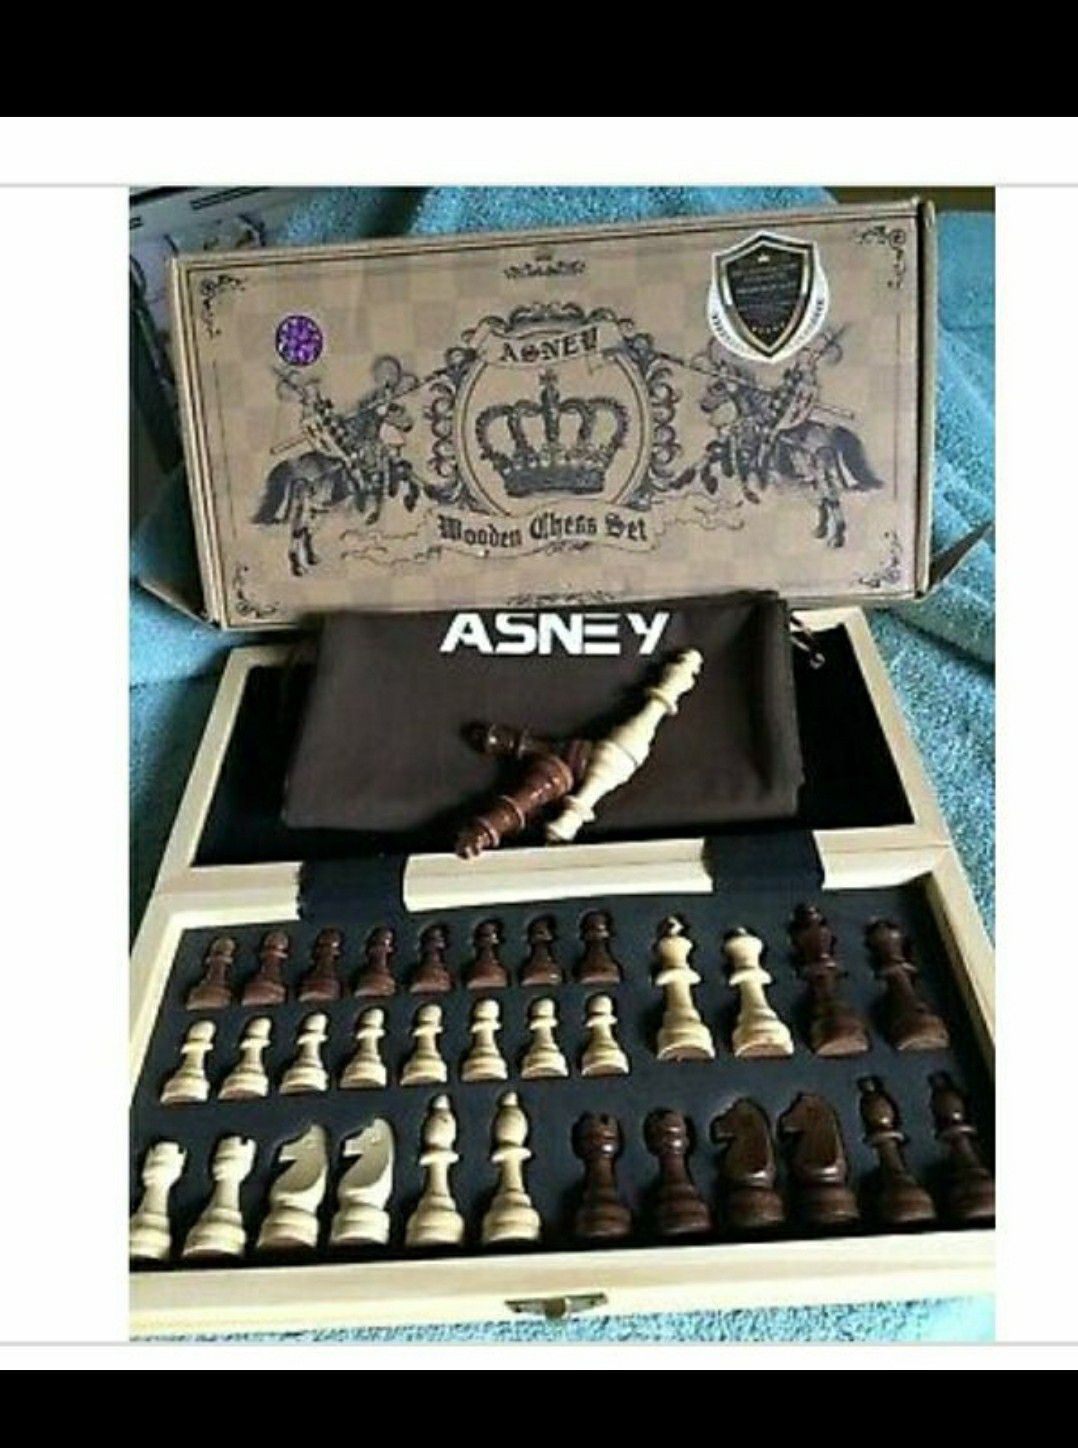 asney wooden chess set12x12 magnetic folding game board w/extra pcs & carry bag